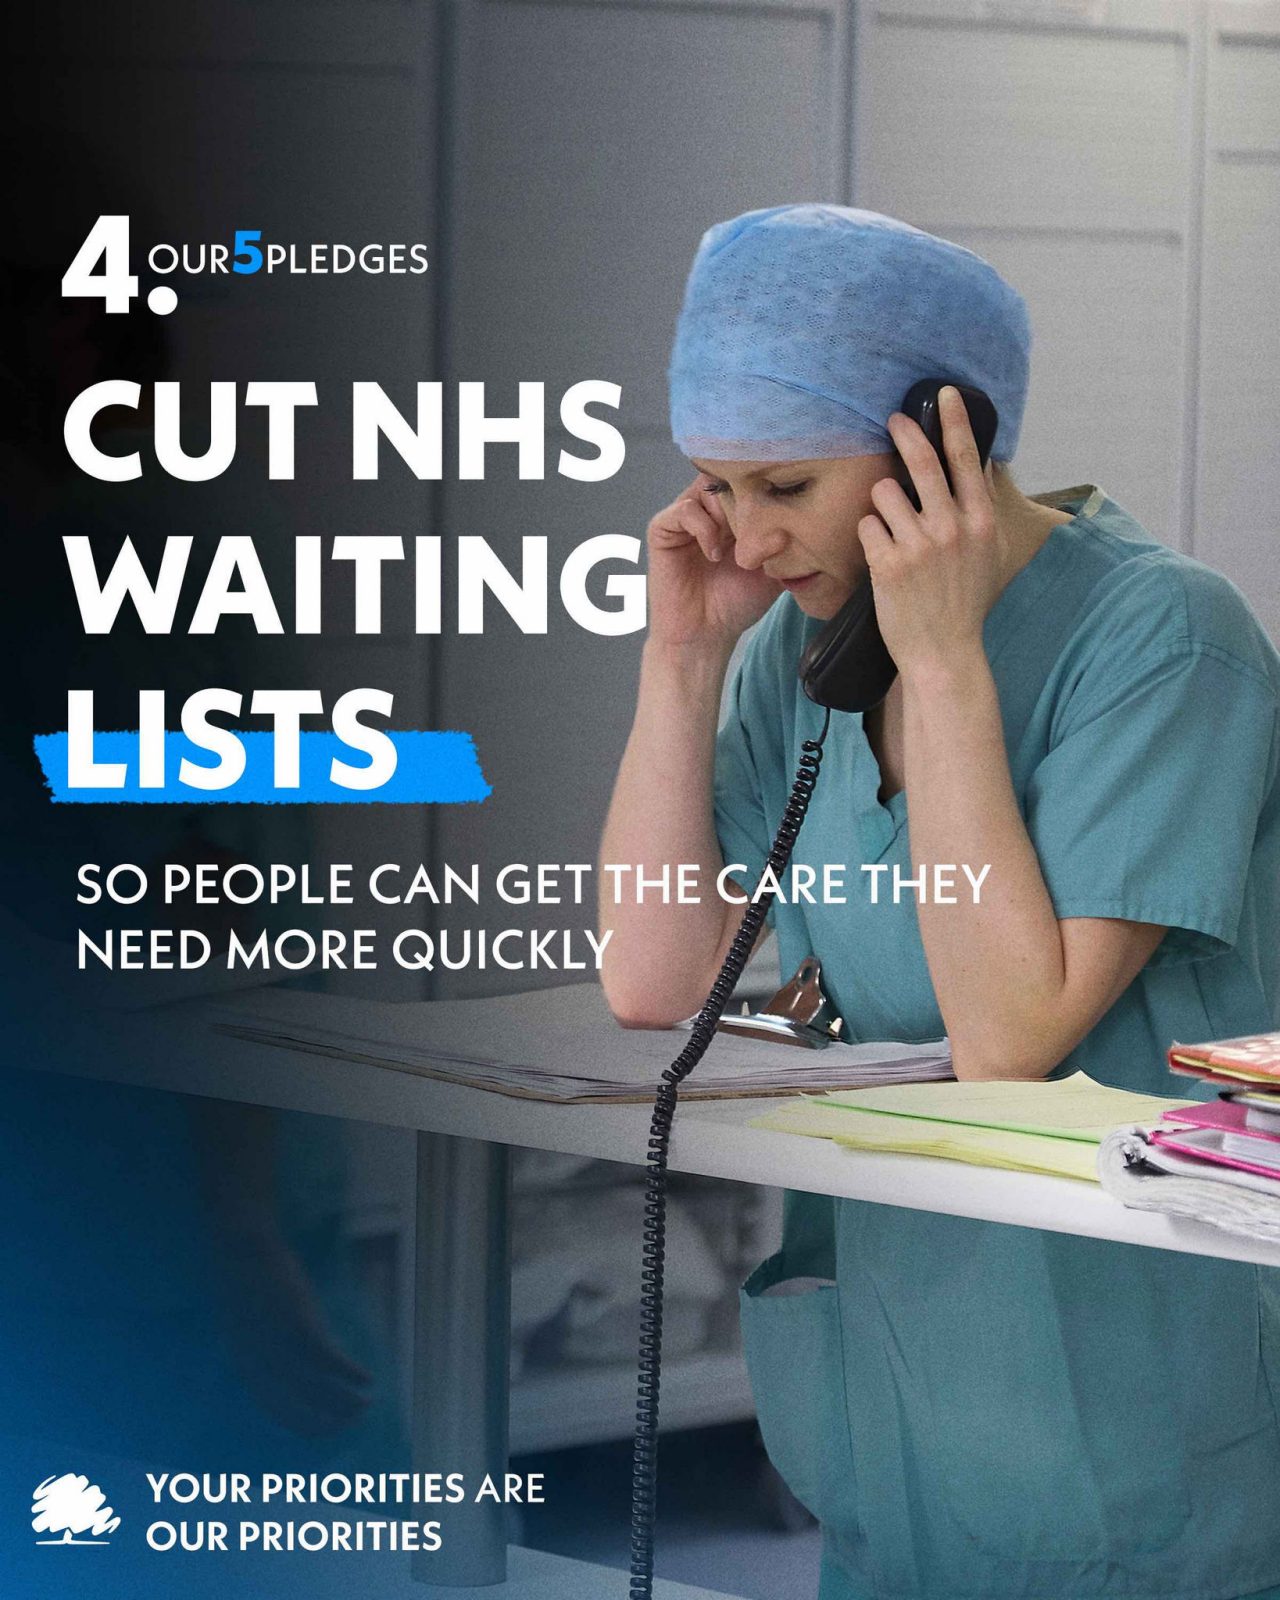 We will cut NHS waiting times